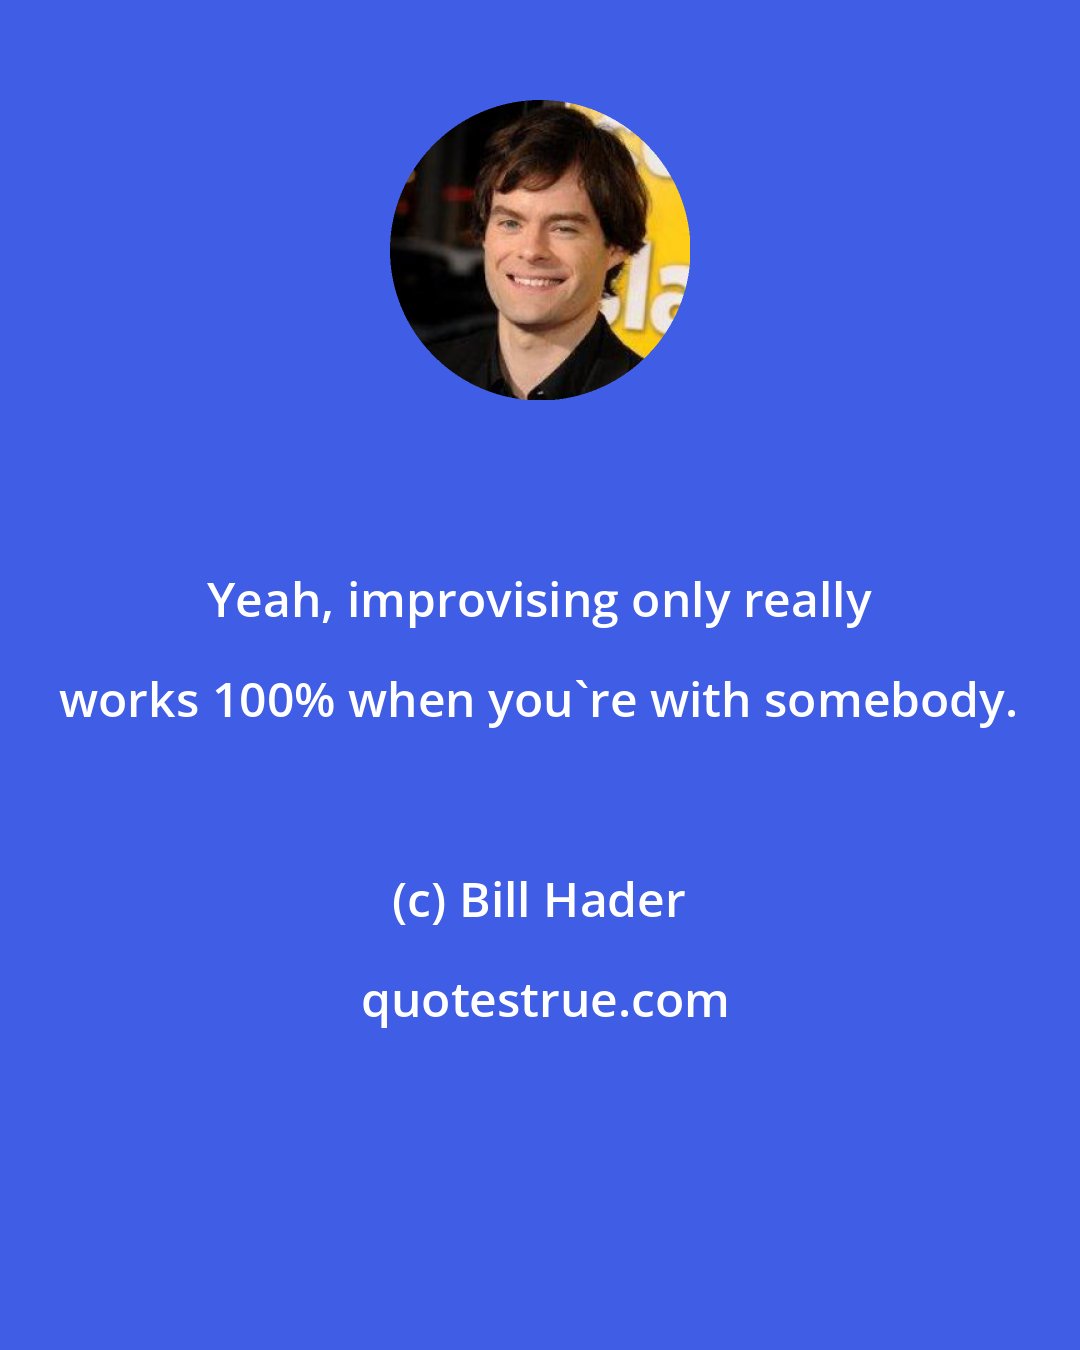 Bill Hader: Yeah, improvising only really works 100% when you're with somebody.